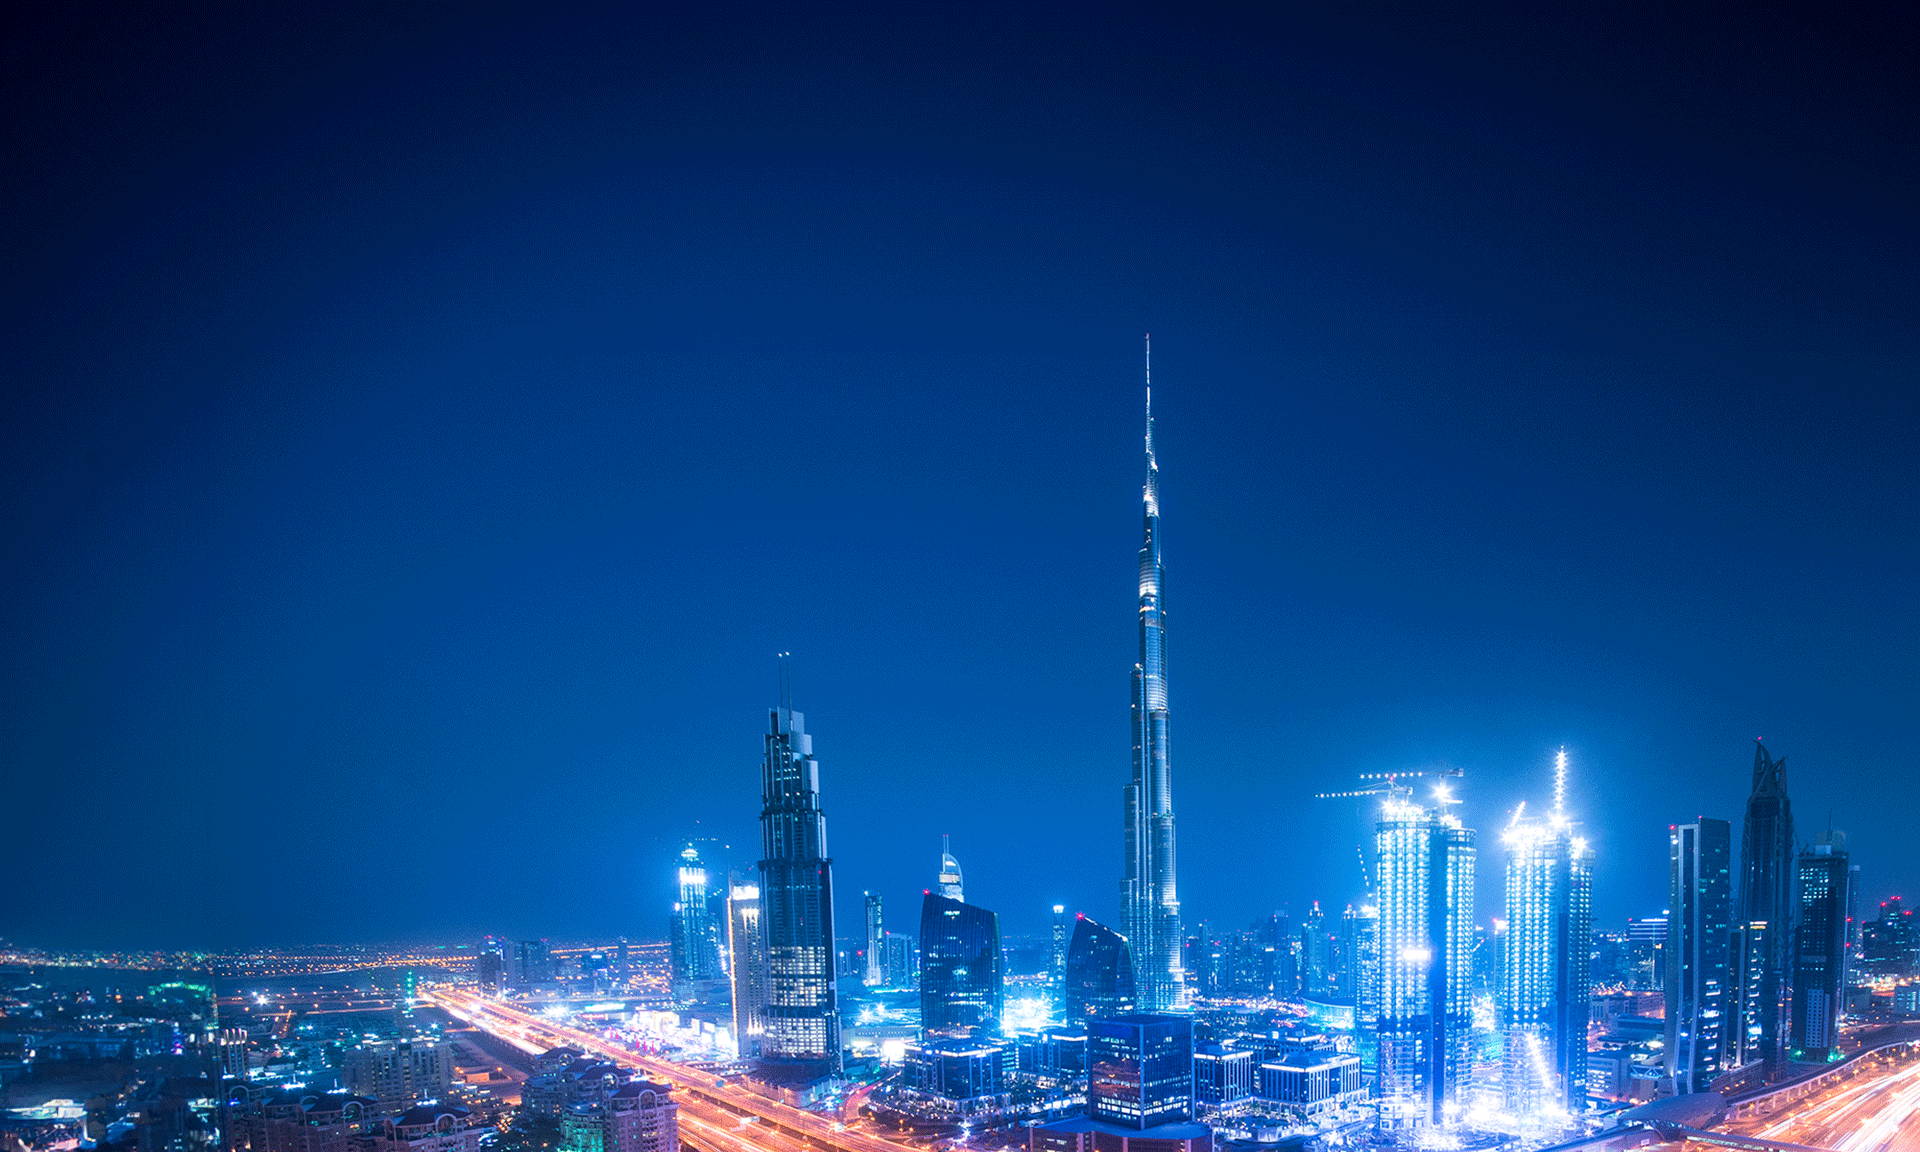 UAE Latest Business News: Dubai free zones recorded 22 percent trade growth in the year 2018